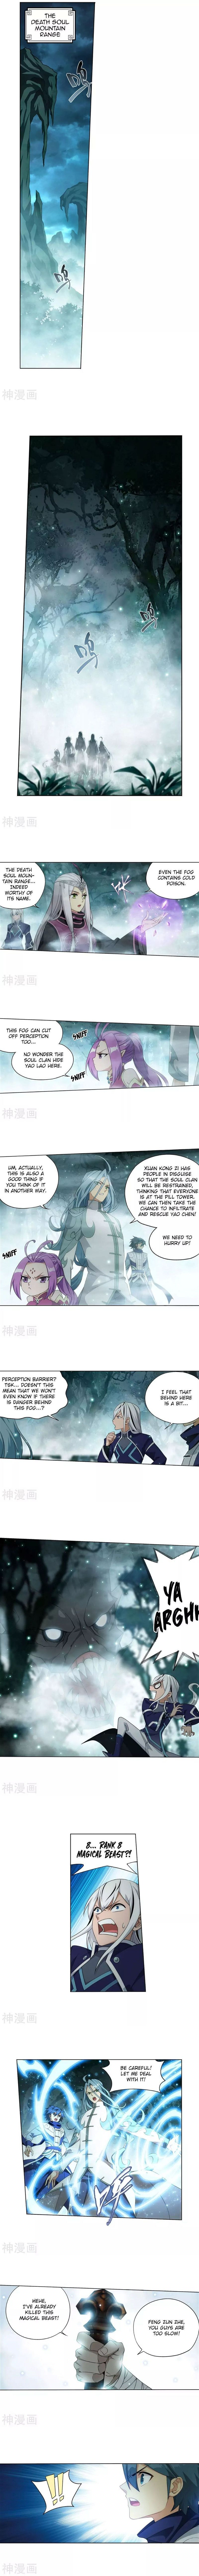 Doupo Cangqiong Chapter 294 page 2